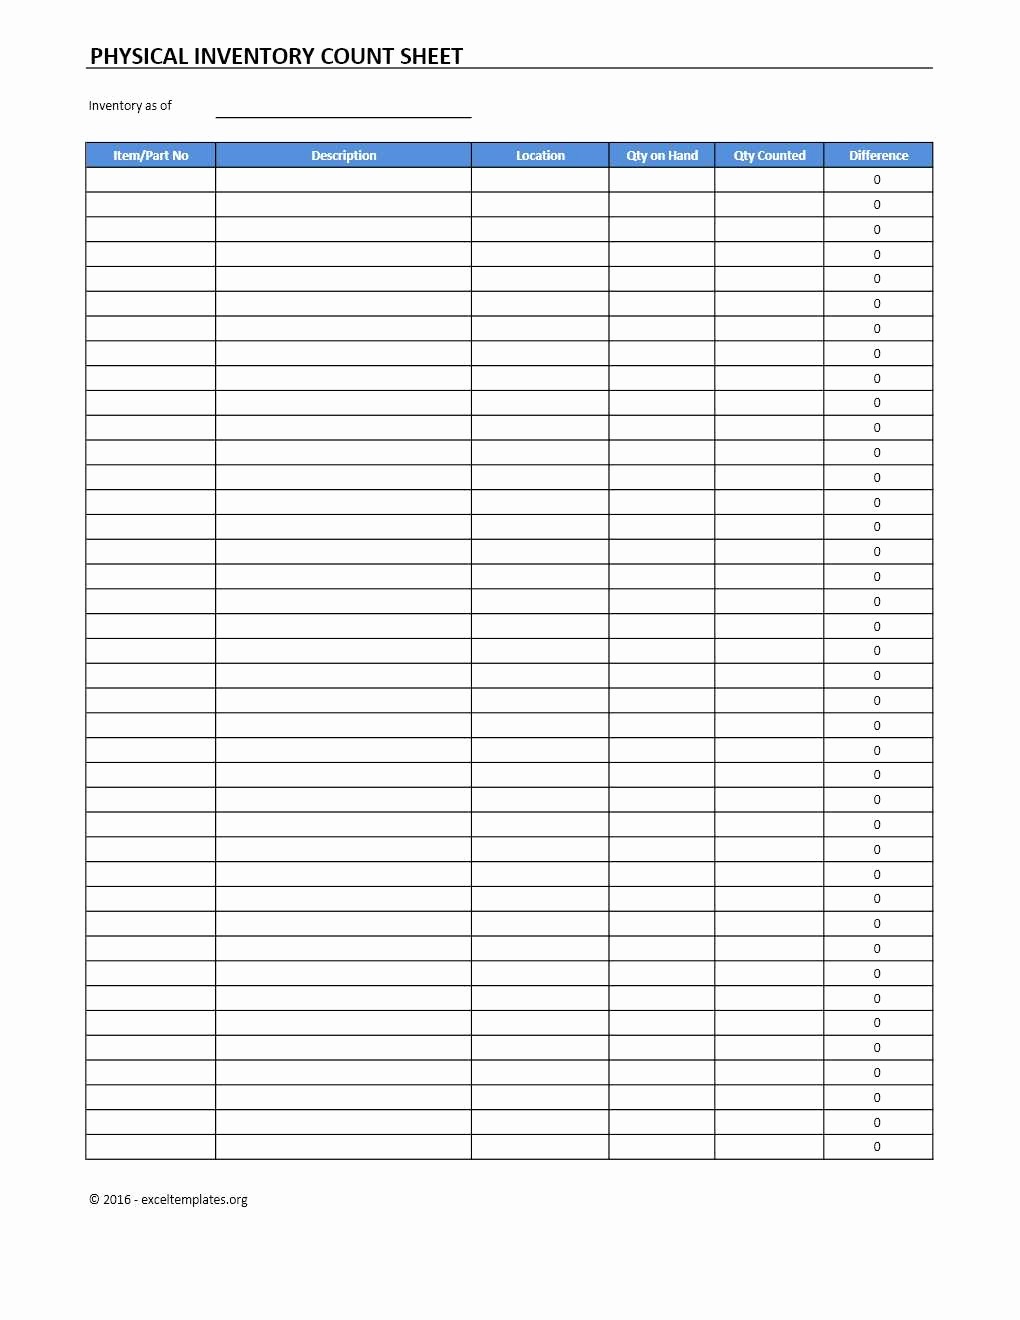 Physical Inventory Count Sheet Templates Beautiful Physical Inventory Count Sheet Template